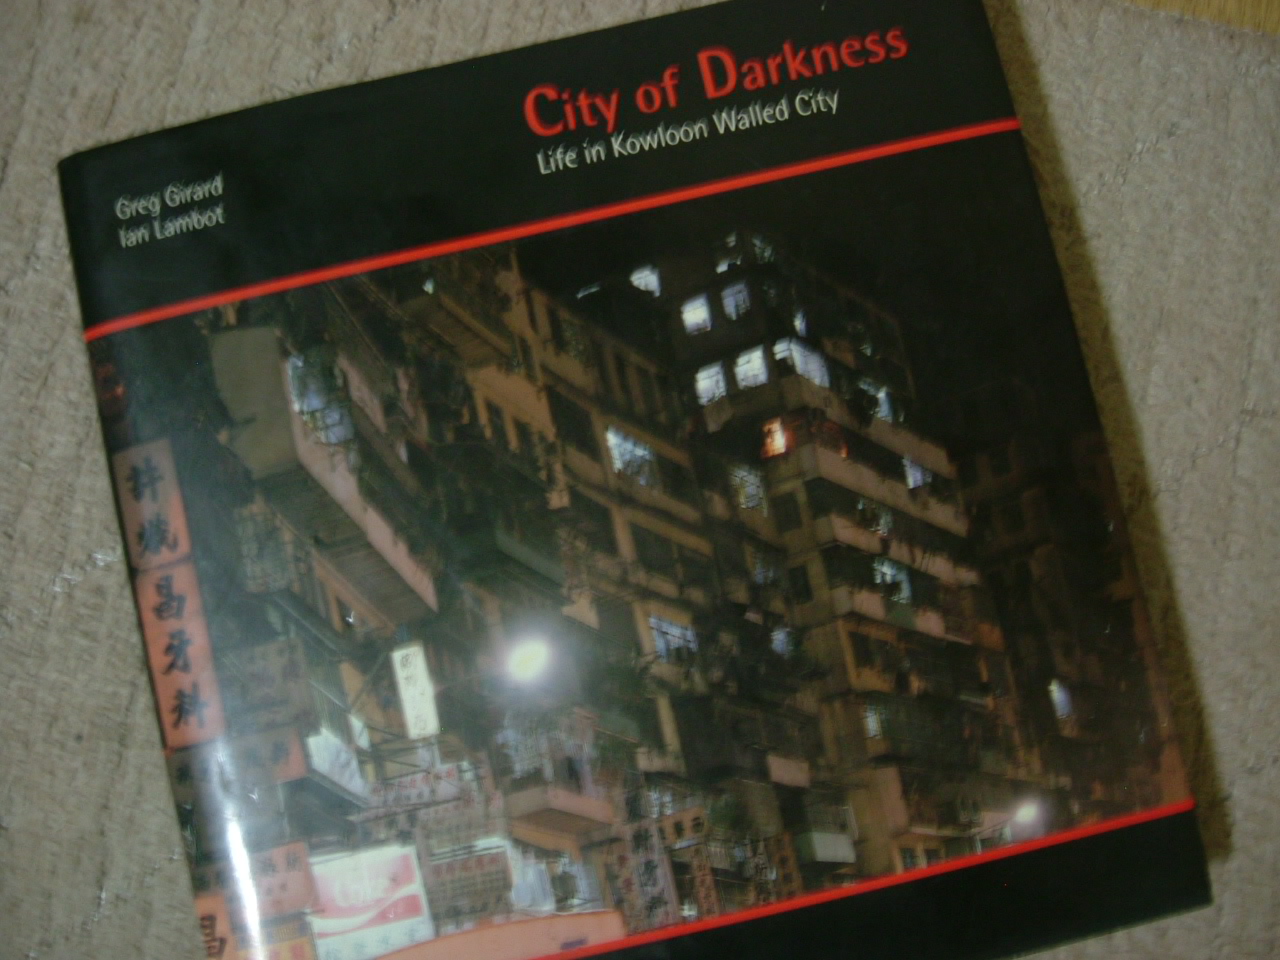 City of darkness: asia airport